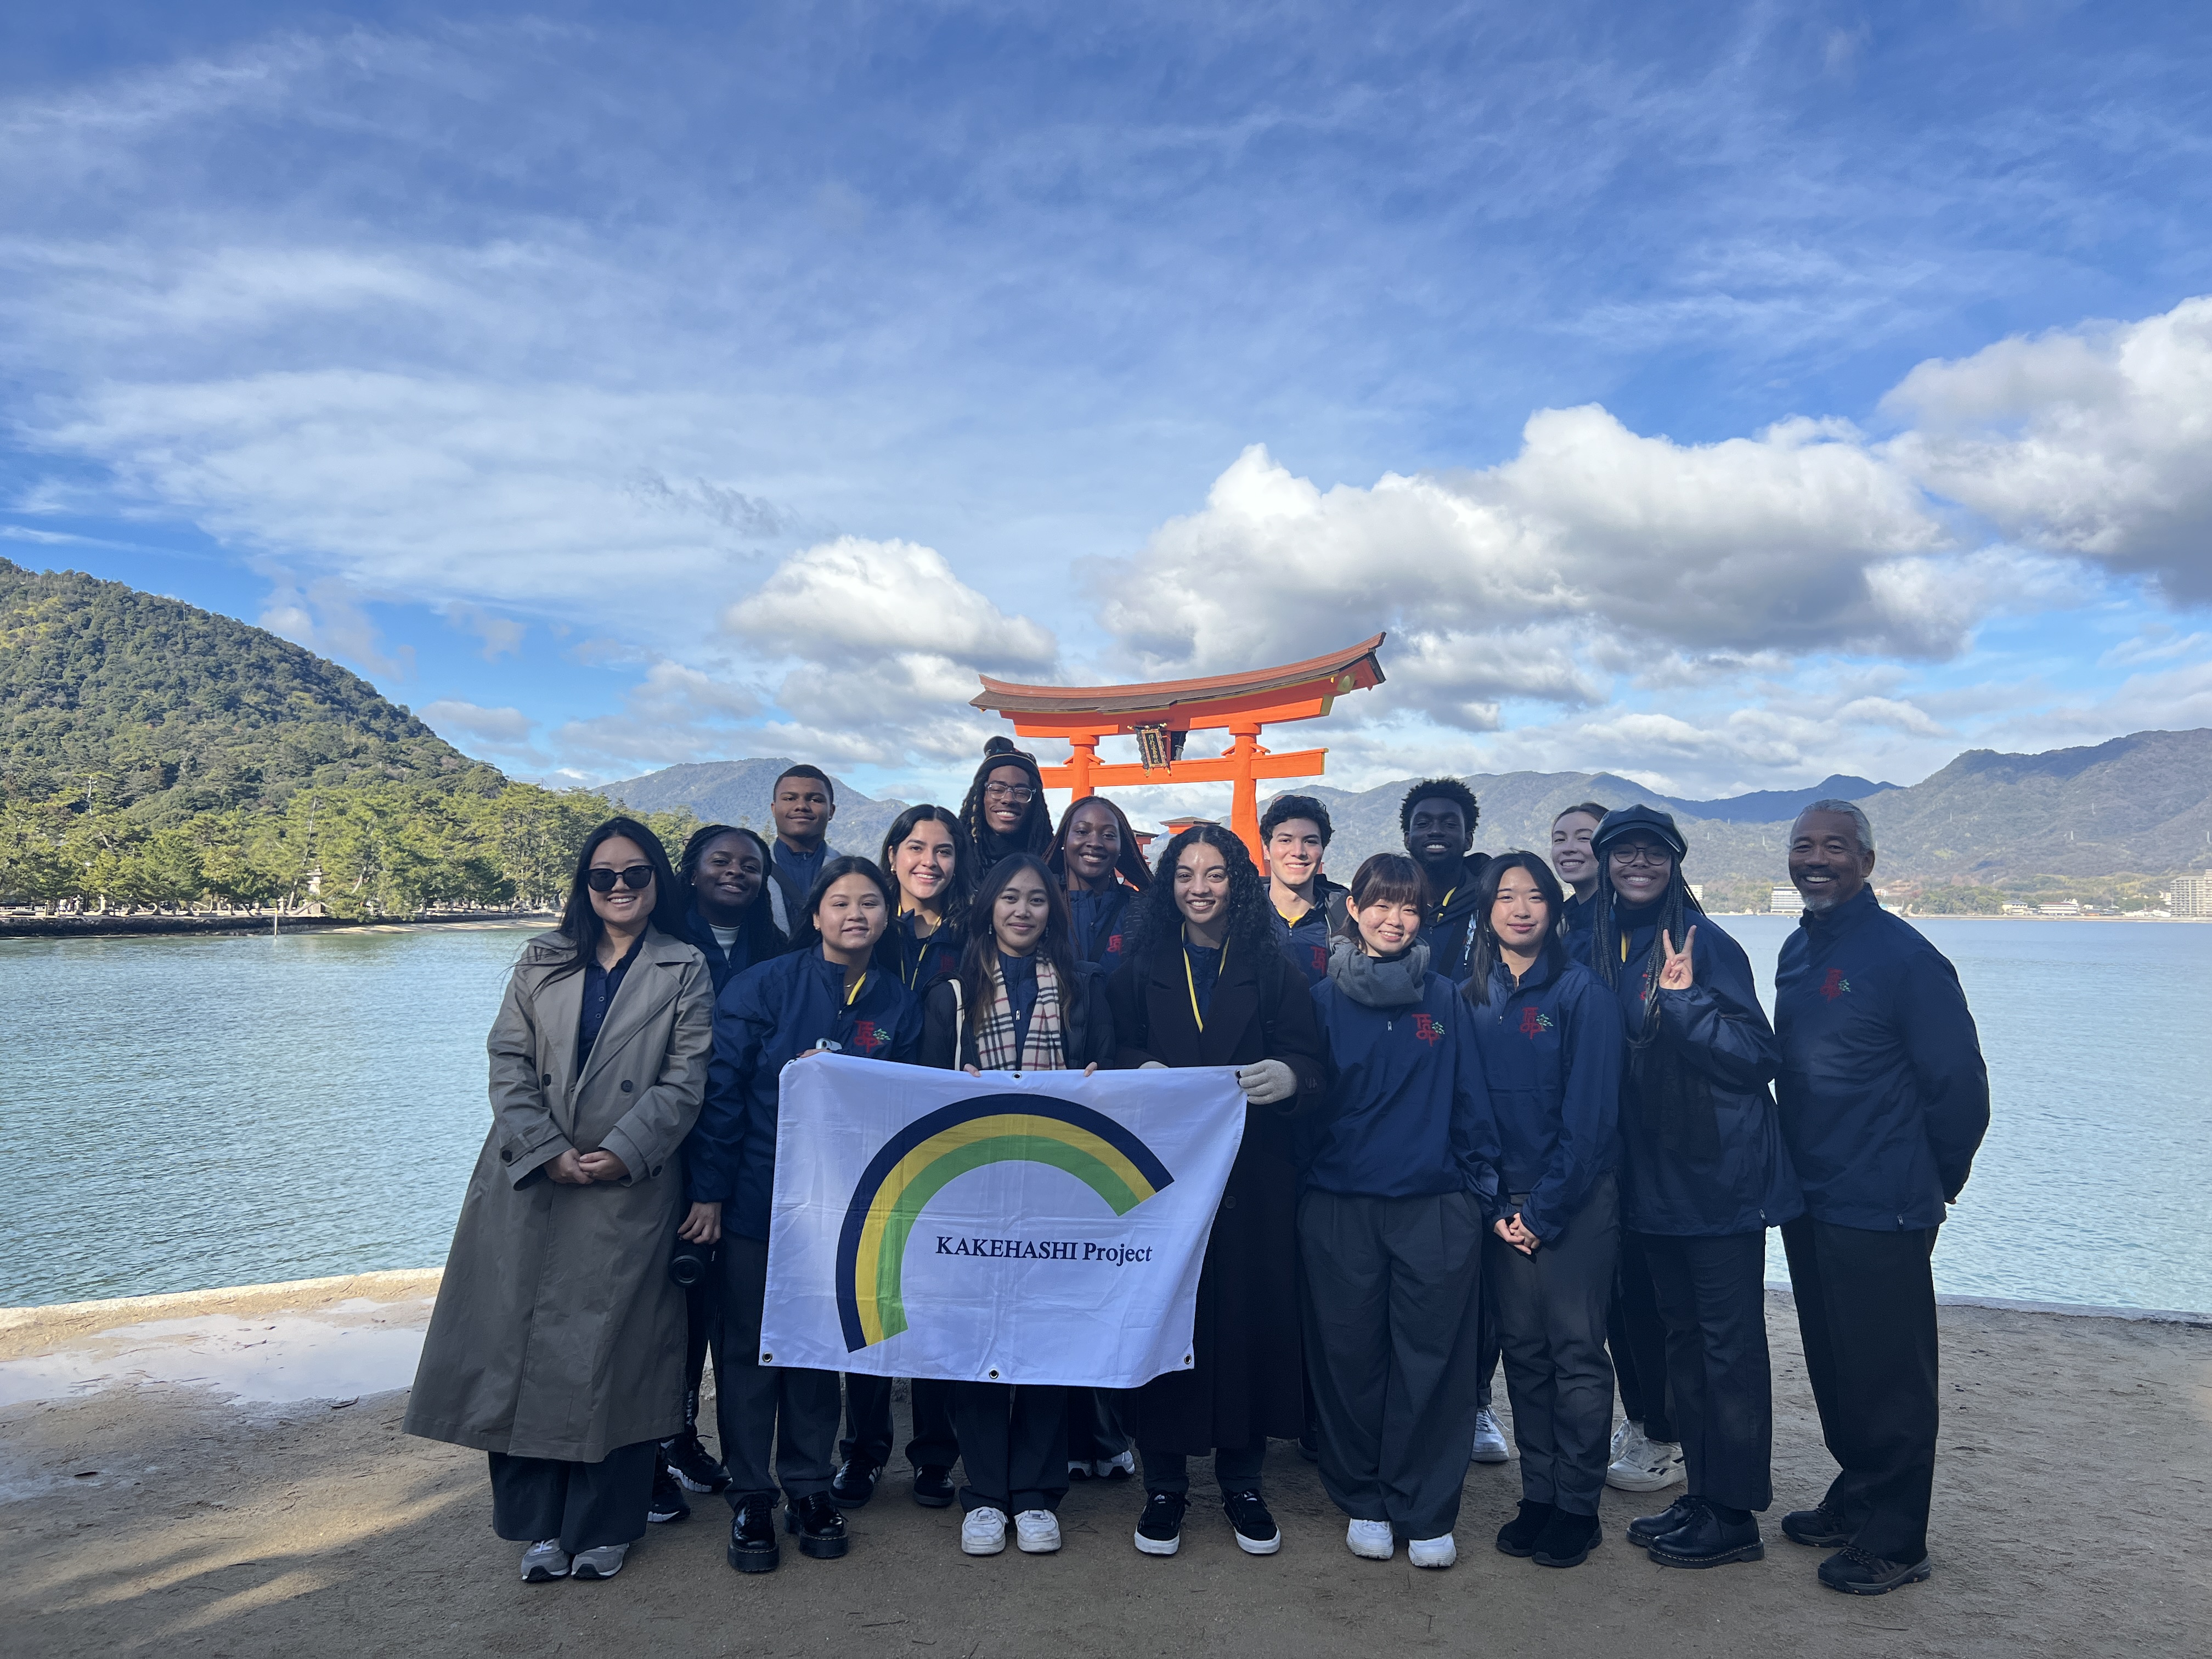 14 LMU students along with Dr. Curtiss Takada Rooks and Min-Jung Kim in front of the Itsukushima Shrine in Japan while holding a white banner that reads KAKEHASHI PROJECT